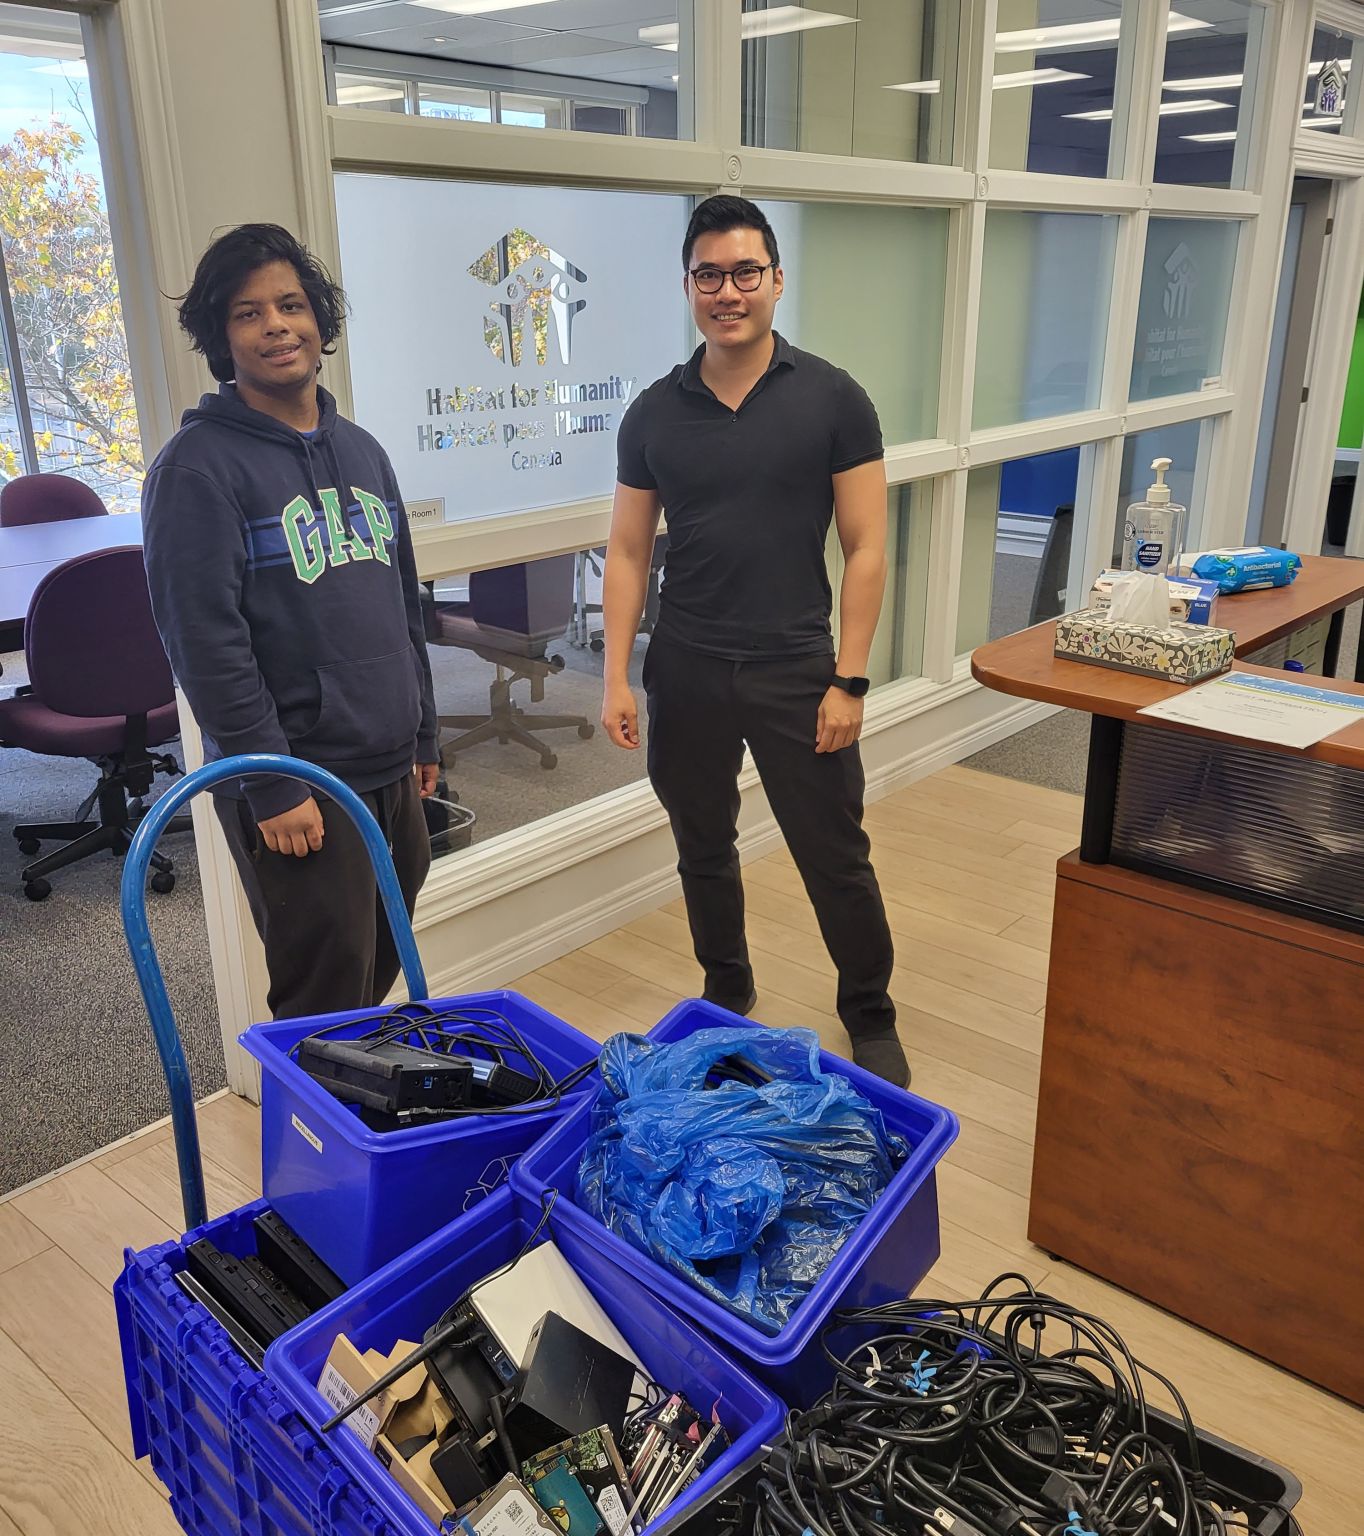 reBOOT's Krish Saha (left) and Jameson from Habitat for Humanity GTA pose with bins full of equipment being donated by Habitat for Humanity GTA.